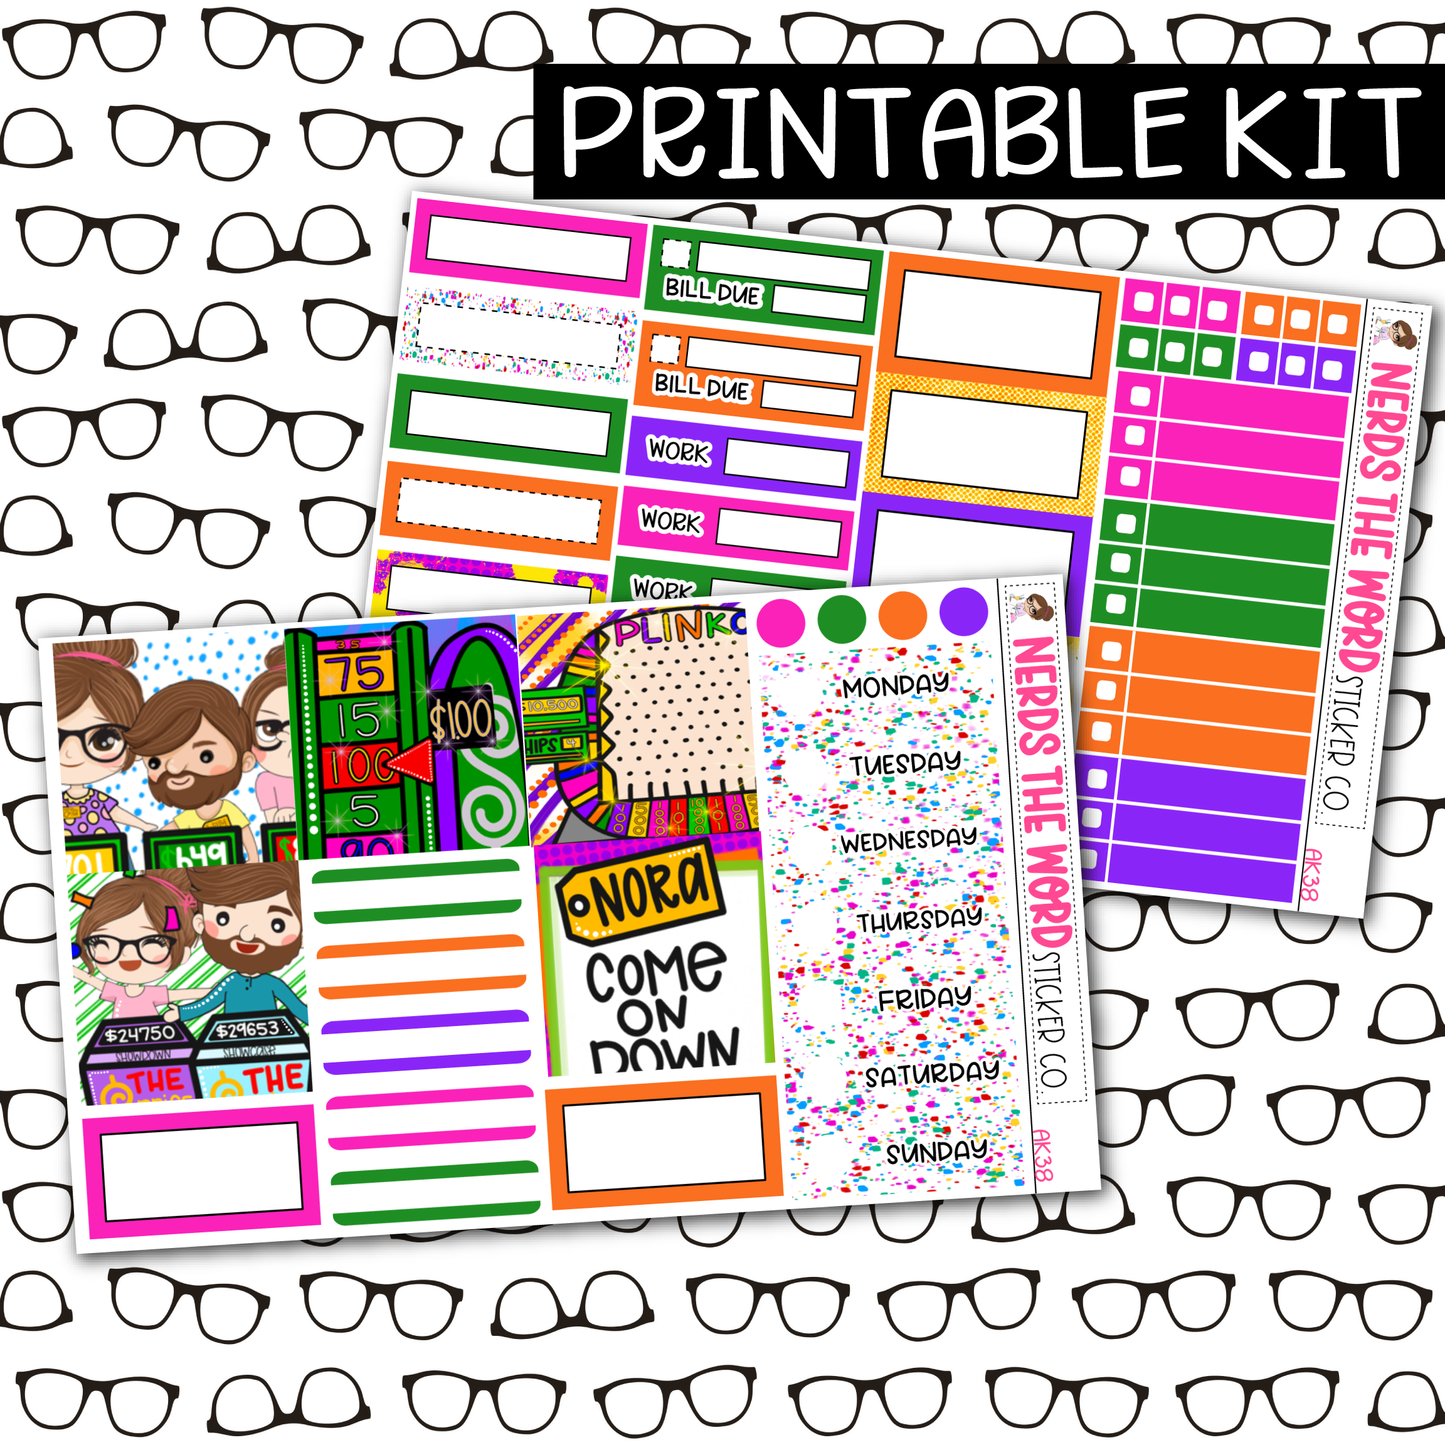 PRINTABLE One Dollar Weekly Kit - Choose your Size